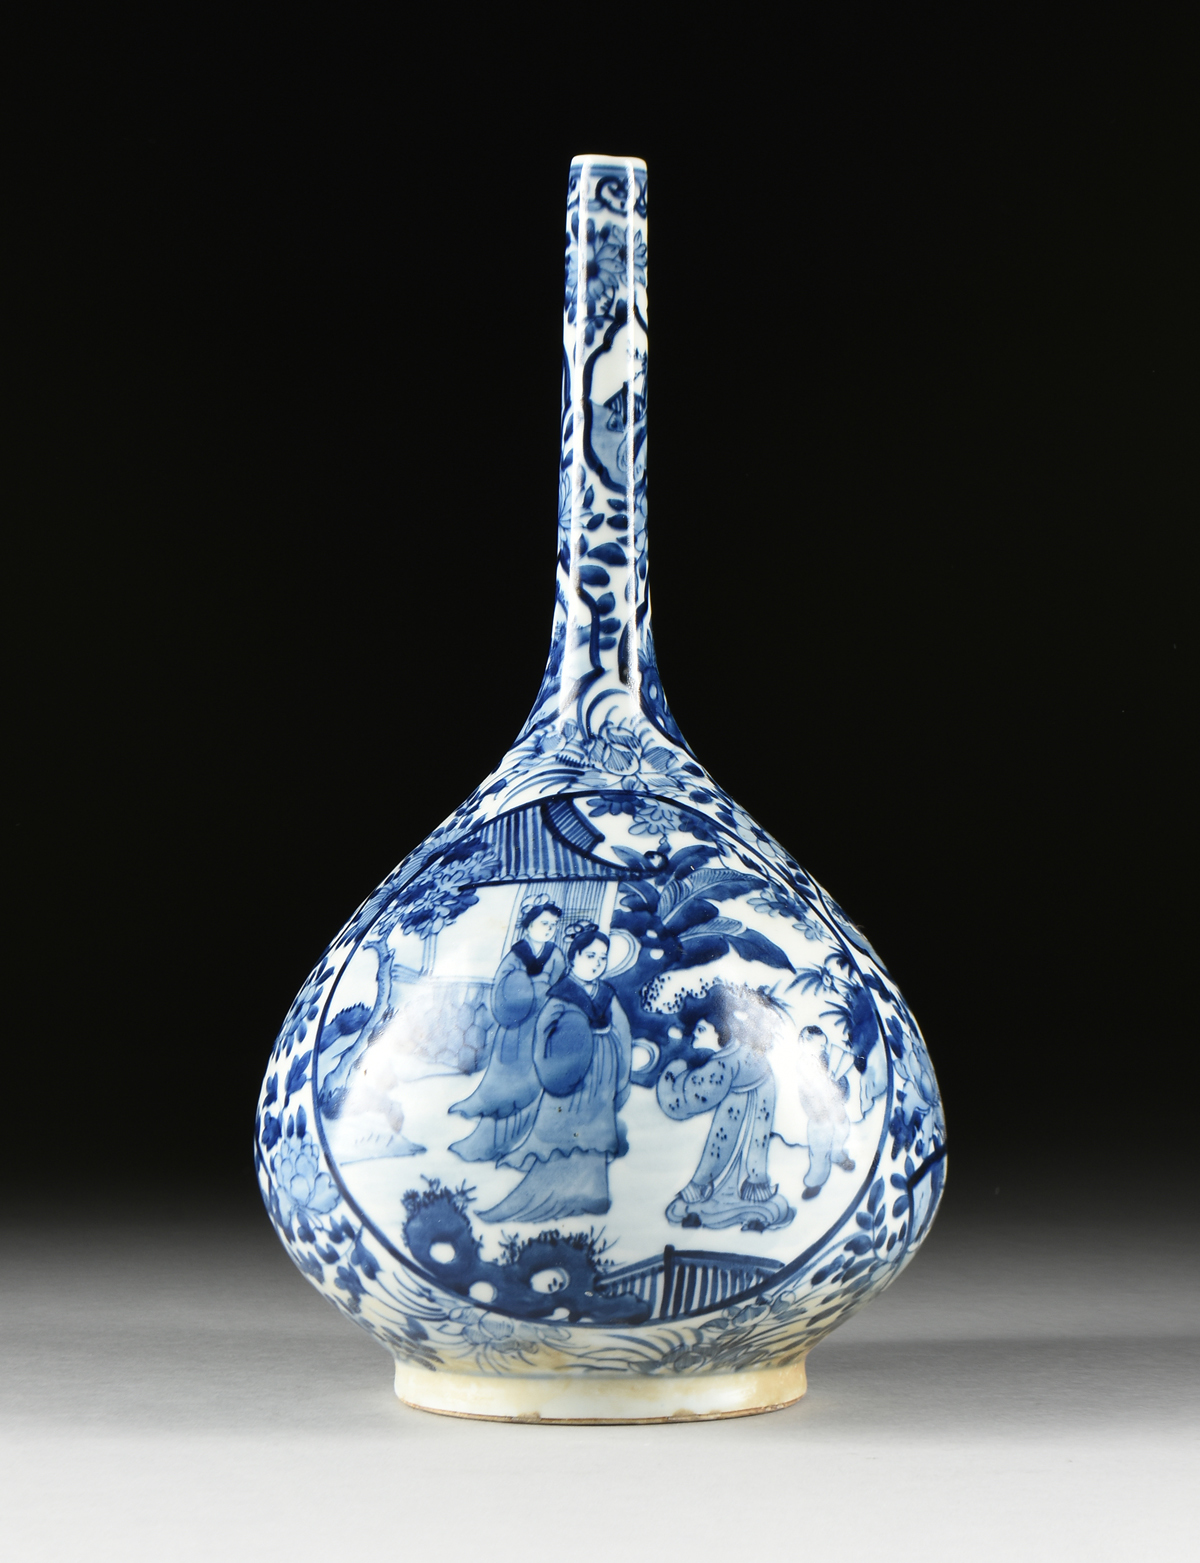 A QING DYNASTY BLUE AND WHITE PORCELAIN BOTTLE VASE, SHIPWRECK ARTIFACT, ATTRIBUTED TO THE KANGXI - Image 5 of 8